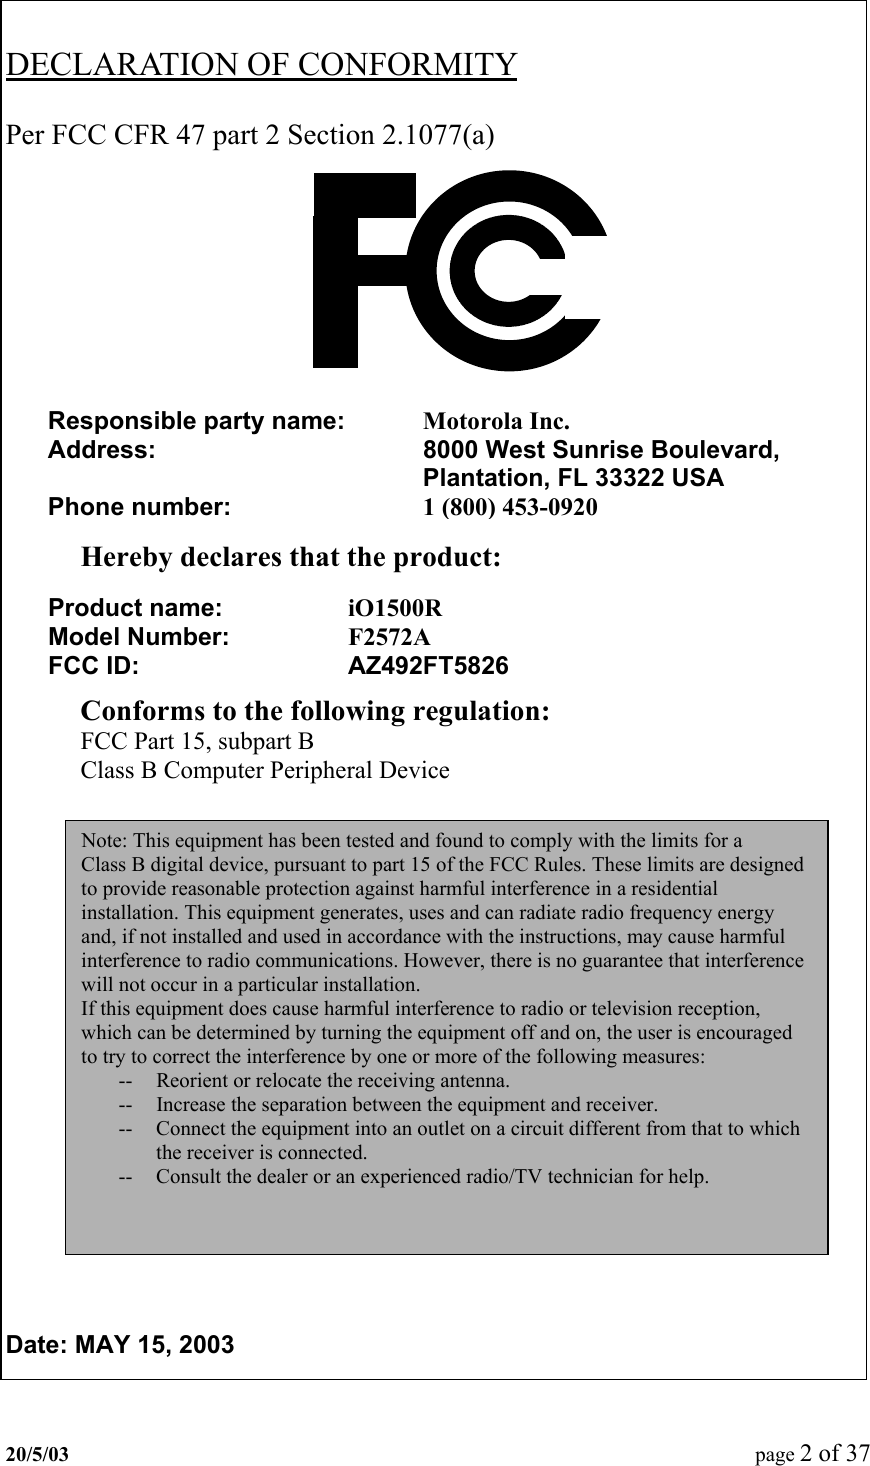   DECLARATION OF CONFORMITY   Per FCC CFR 47 part 2 Section 2.1077(a)             Hereby declares that the product:     Conforms to the following regulation: FCC Part 15, subpart B Class B Computer Peripheral Device                    Date: MAY 15, 2003  Responsible party name:   Motorola Inc. Address:  8000 West Sunrise Boulevard, Plantation, FL 33322 USA   Phone number:  1 (800) 453-0920Product name:     iO1500R Model Number:     F2572A FCC ID:    AZ492FT5826Note: This equipment has been tested and found to comply with the limits for a Class B digital device, pursuant to part 15 of the FCC Rules. These limits are designed to provide reasonable protection against harmful interference in a residential installation. This equipment generates, uses and can radiate radio frequency energy and, if not installed and used in accordance with the instructions, may cause harmful interference to radio communications. However, there is no guarantee that interference will not occur in a particular installation. If this equipment does cause harmful interference to radio or television reception, which can be determined by turning the equipment off and on, the user is encouraged to try to correct the interference by one or more of the following measures: --  Reorient or relocate the receiving antenna. --  Increase the separation between the equipment and receiver. --  Connect the equipment into an outlet on a circuit different from that to which the receiver is connected. --  Consult the dealer or an experienced radio/TV technician for help. 20/5/03  page 2 of 37   